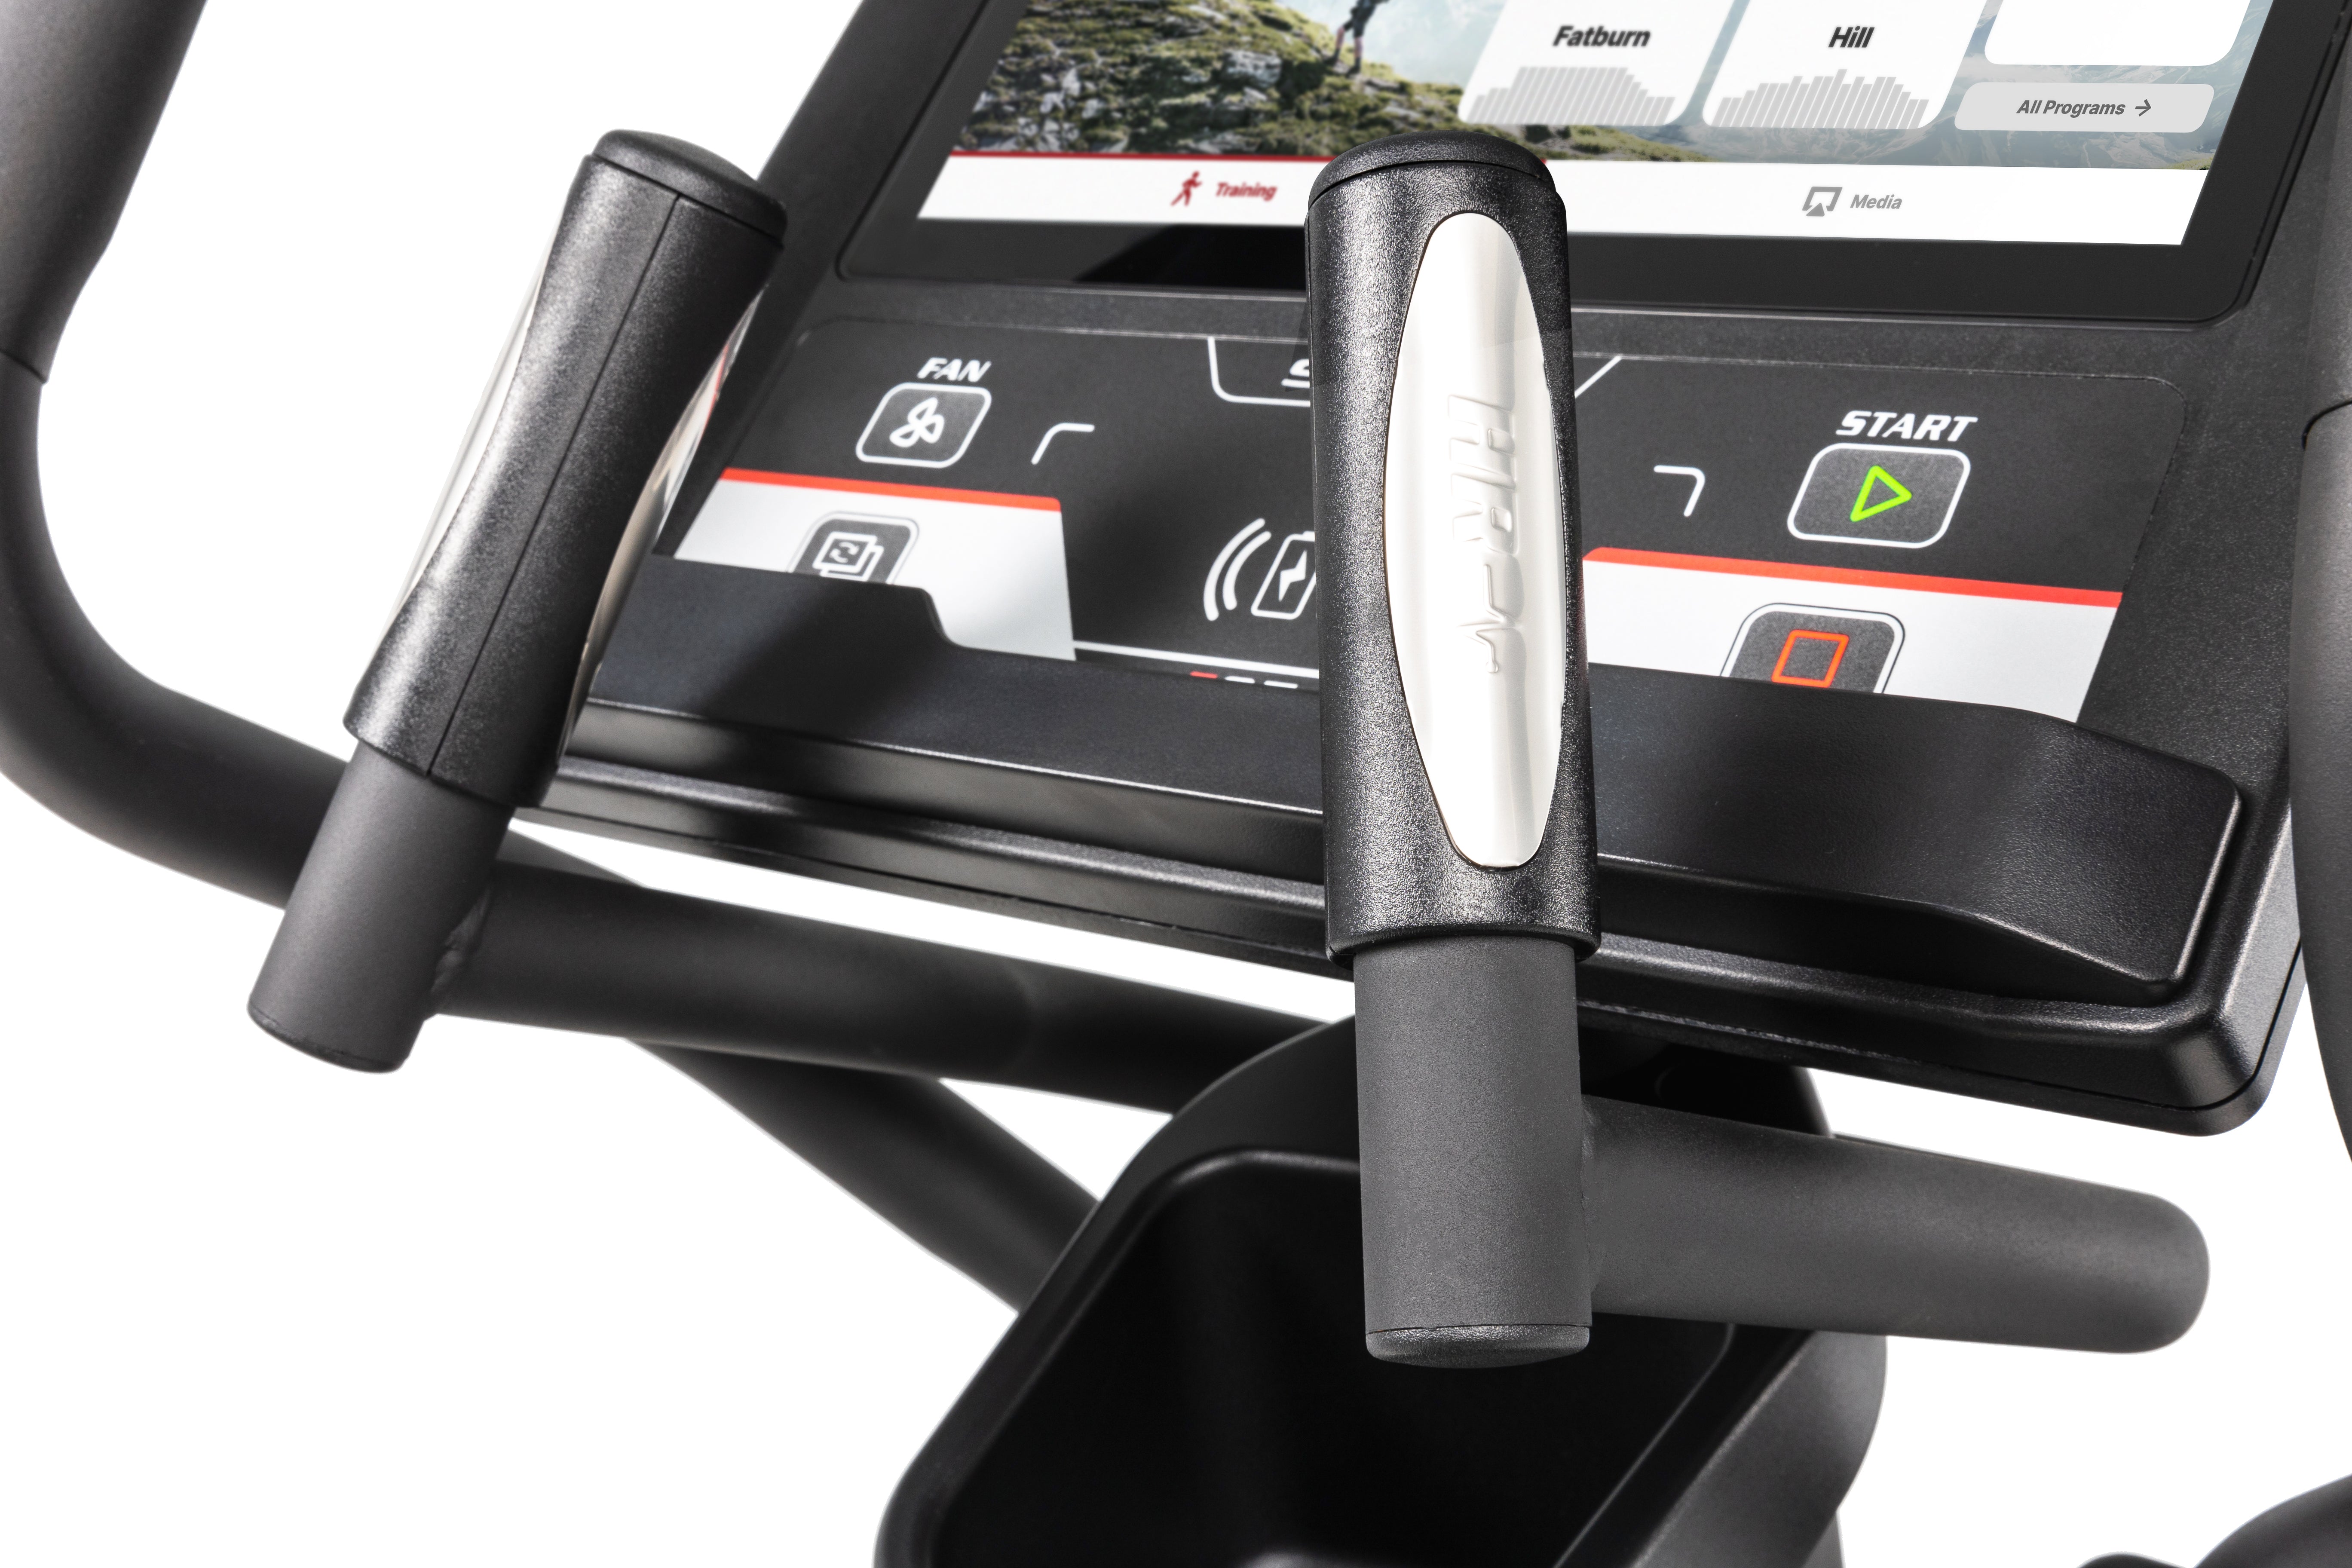 Close-up of the Sole E95S elliptical machine's console, highlighting the touchscreen with workout options, tactile buttons for fan and start, and ergonomic grip handles with integrated heart rate monitors on either side.